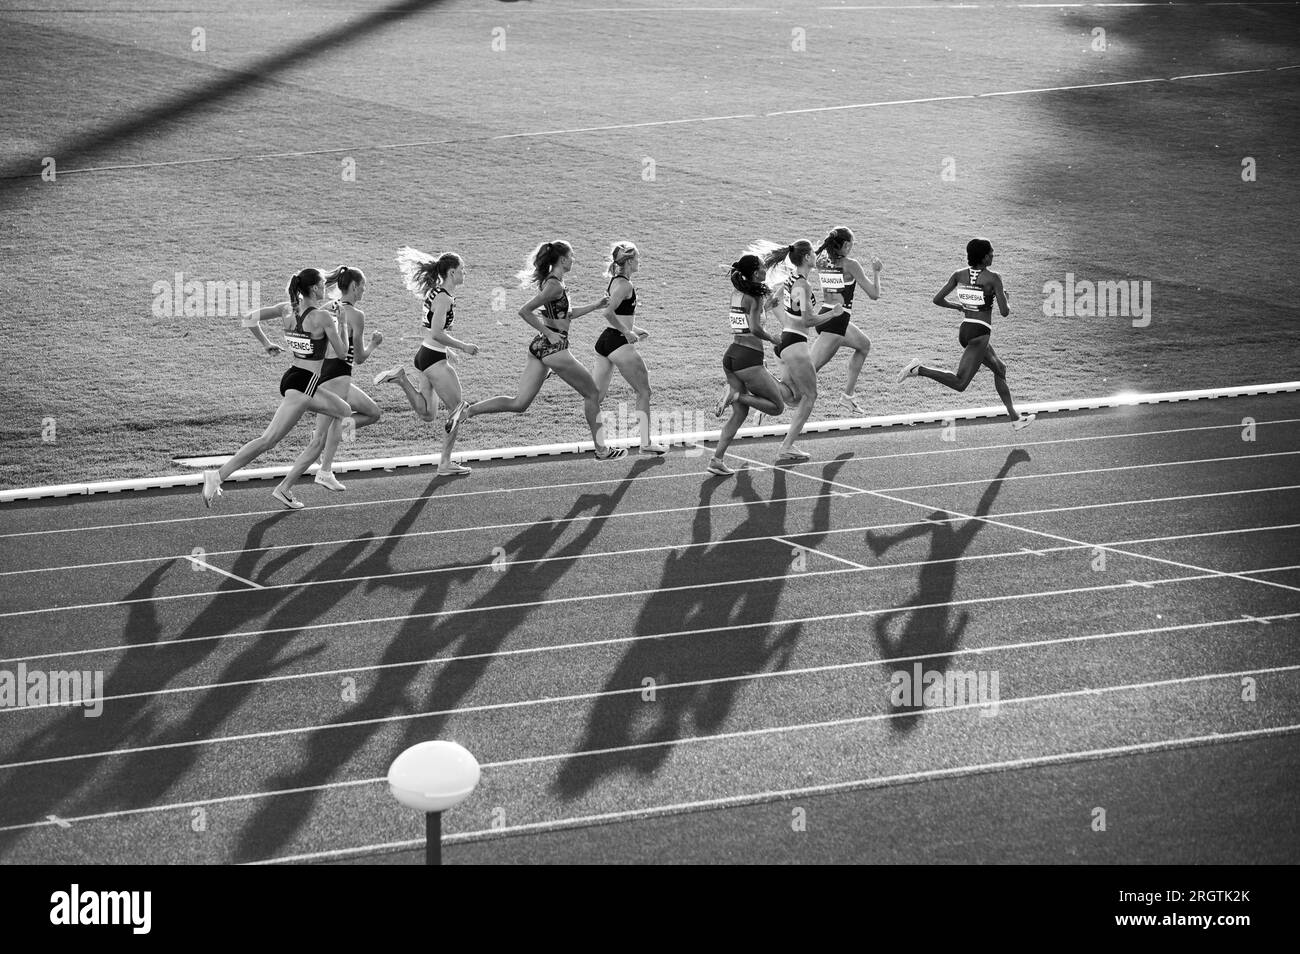 B. BYSTRICA, SLOVAKIA, JULY 20, 2023: Black and White Women's 800m Race Showcases Athletes in Action with Sunset Illumination at Track and Field Meet Stock Photo